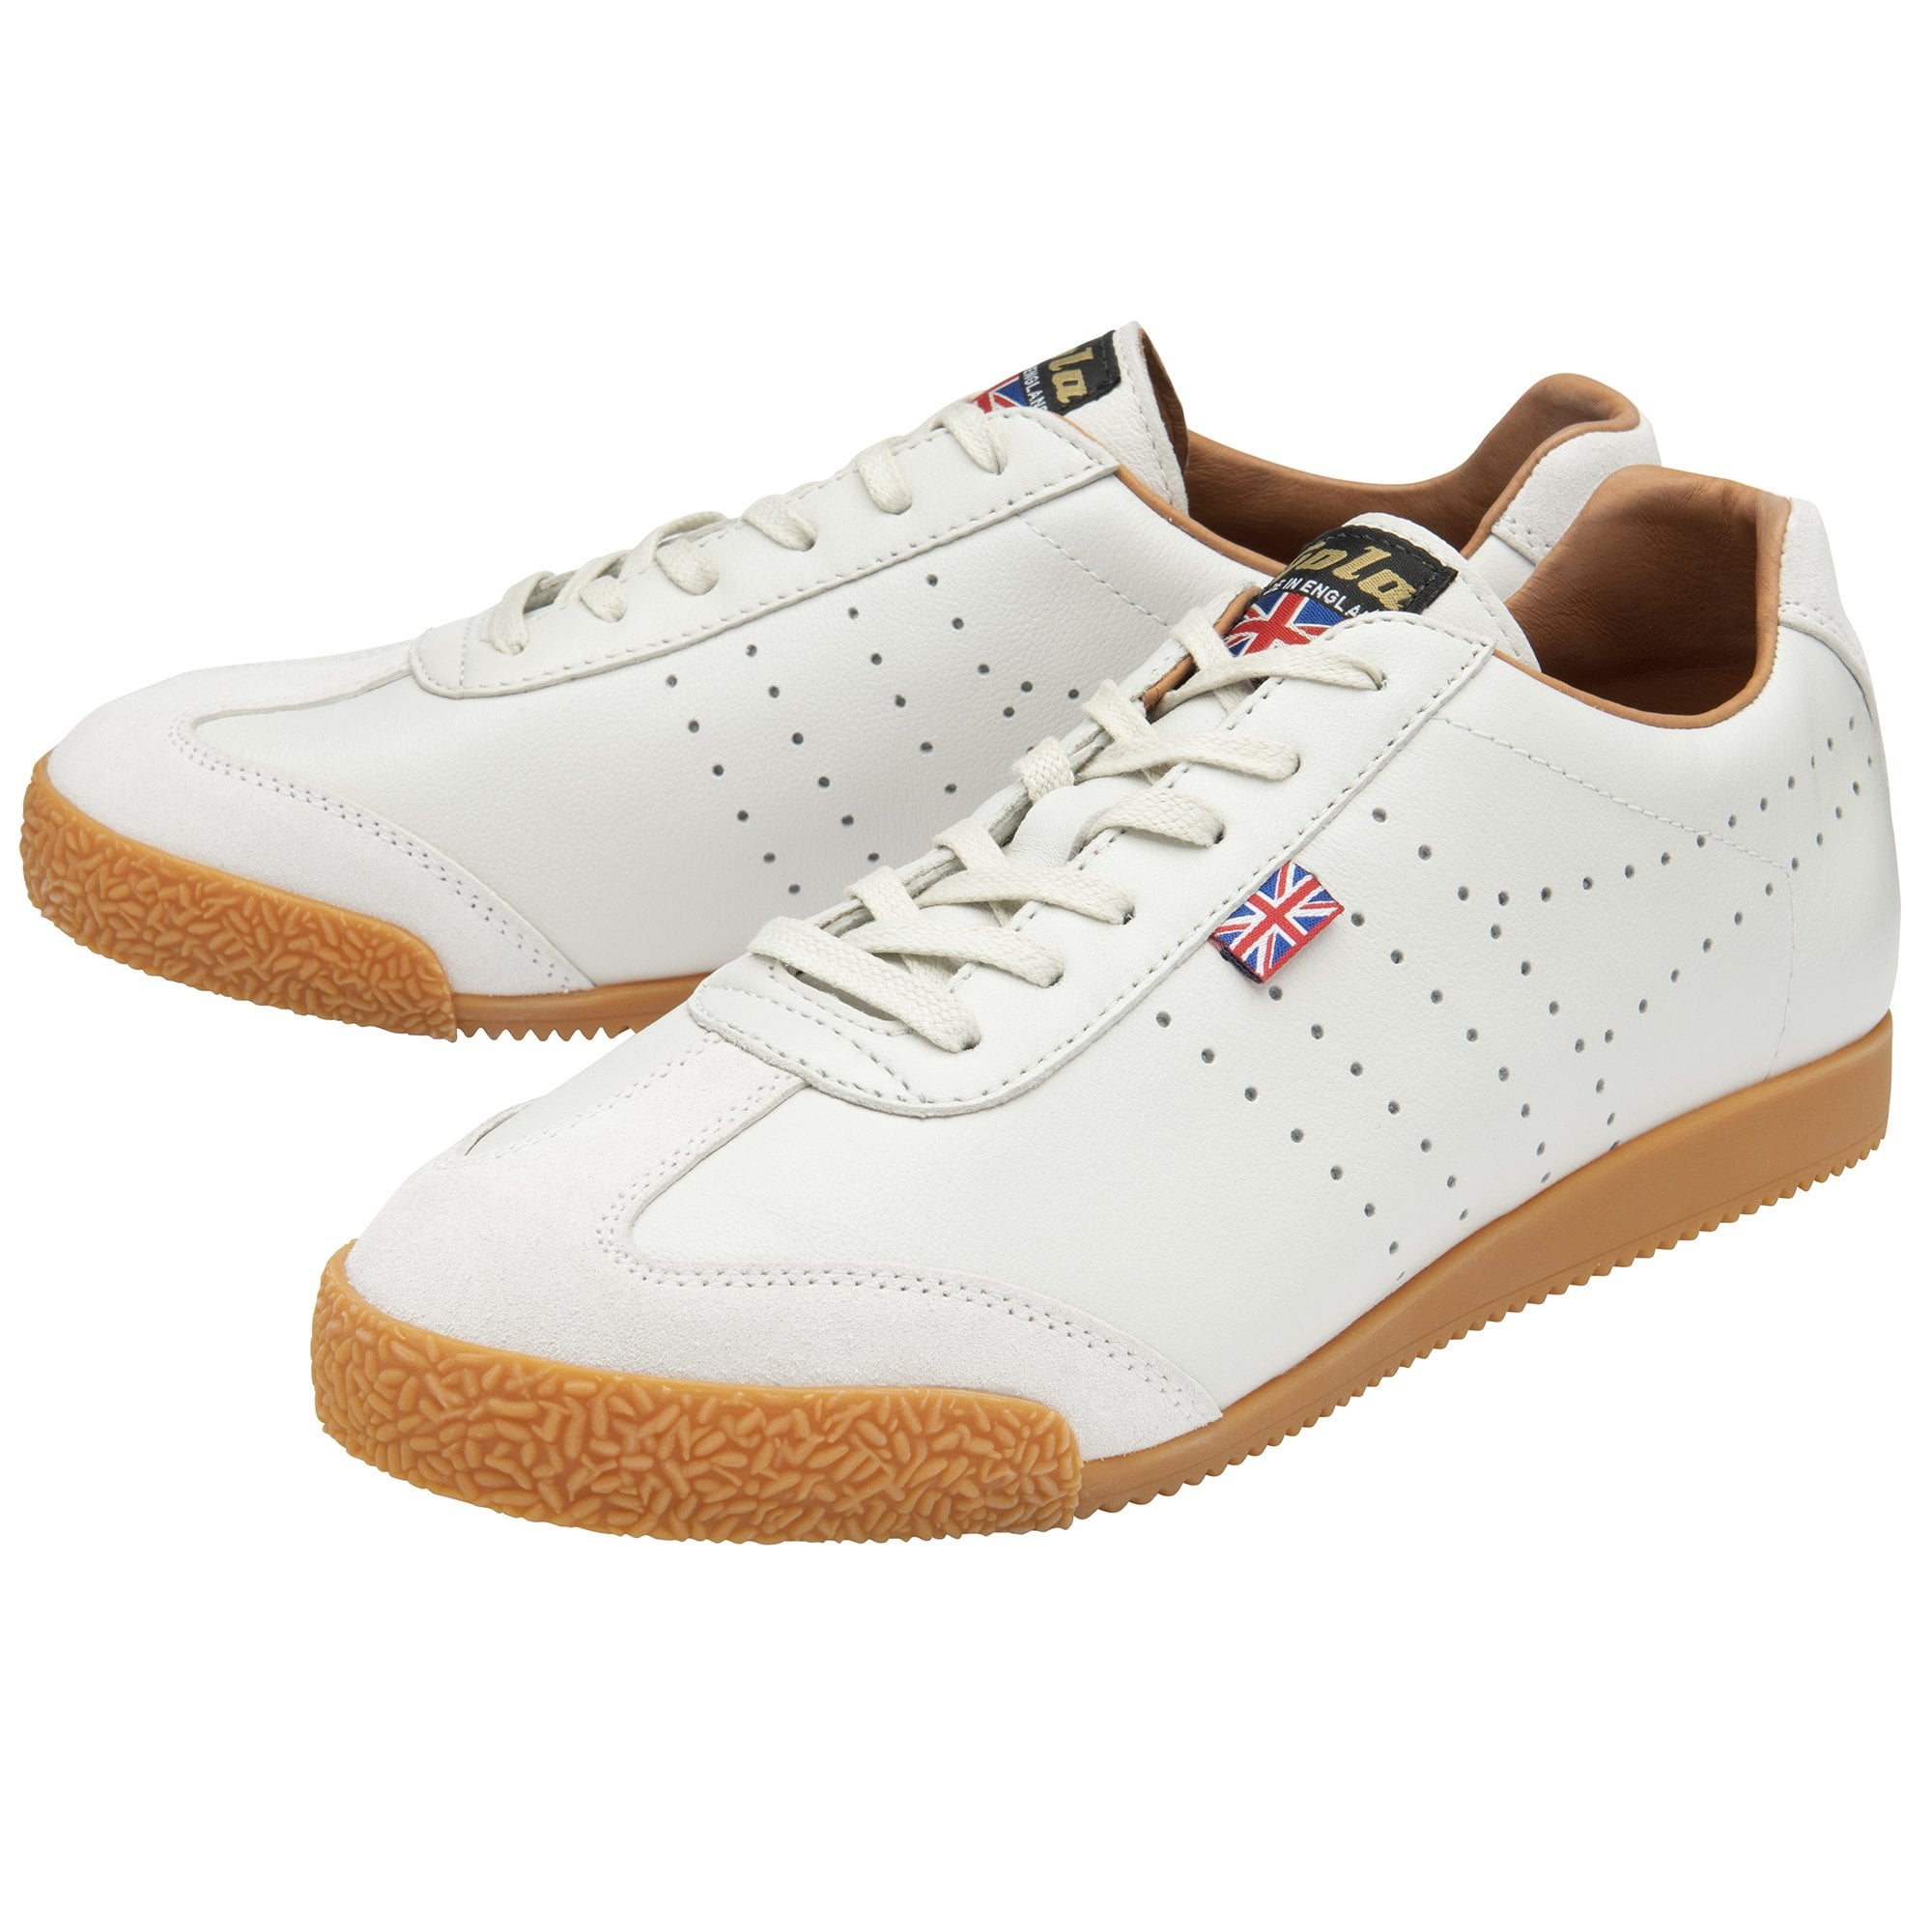 Gola Made in England - 1905 Men's Harrier Luxe Trainers Off White